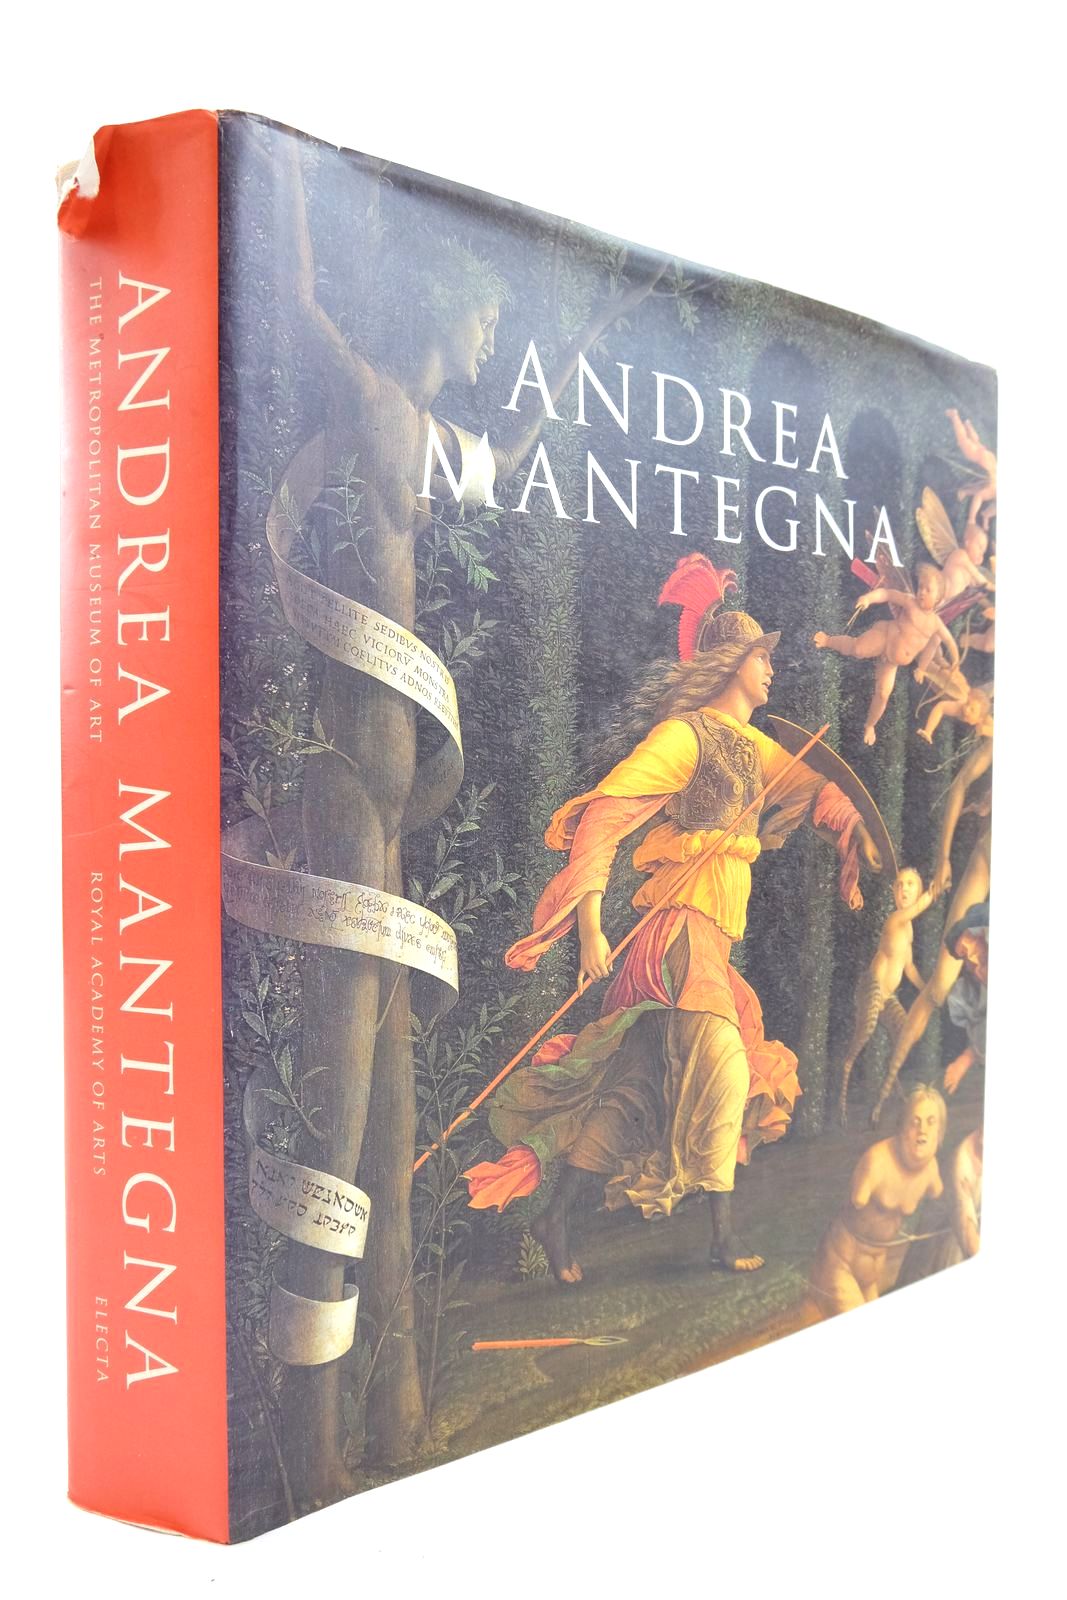 Photo of ANDREA MANTEGNA written by Martineau, Jane et al, illustrated by Mantegna, Andrea published by Olivetti, Electa (STOCK CODE: 2139030)  for sale by Stella & Rose's Books